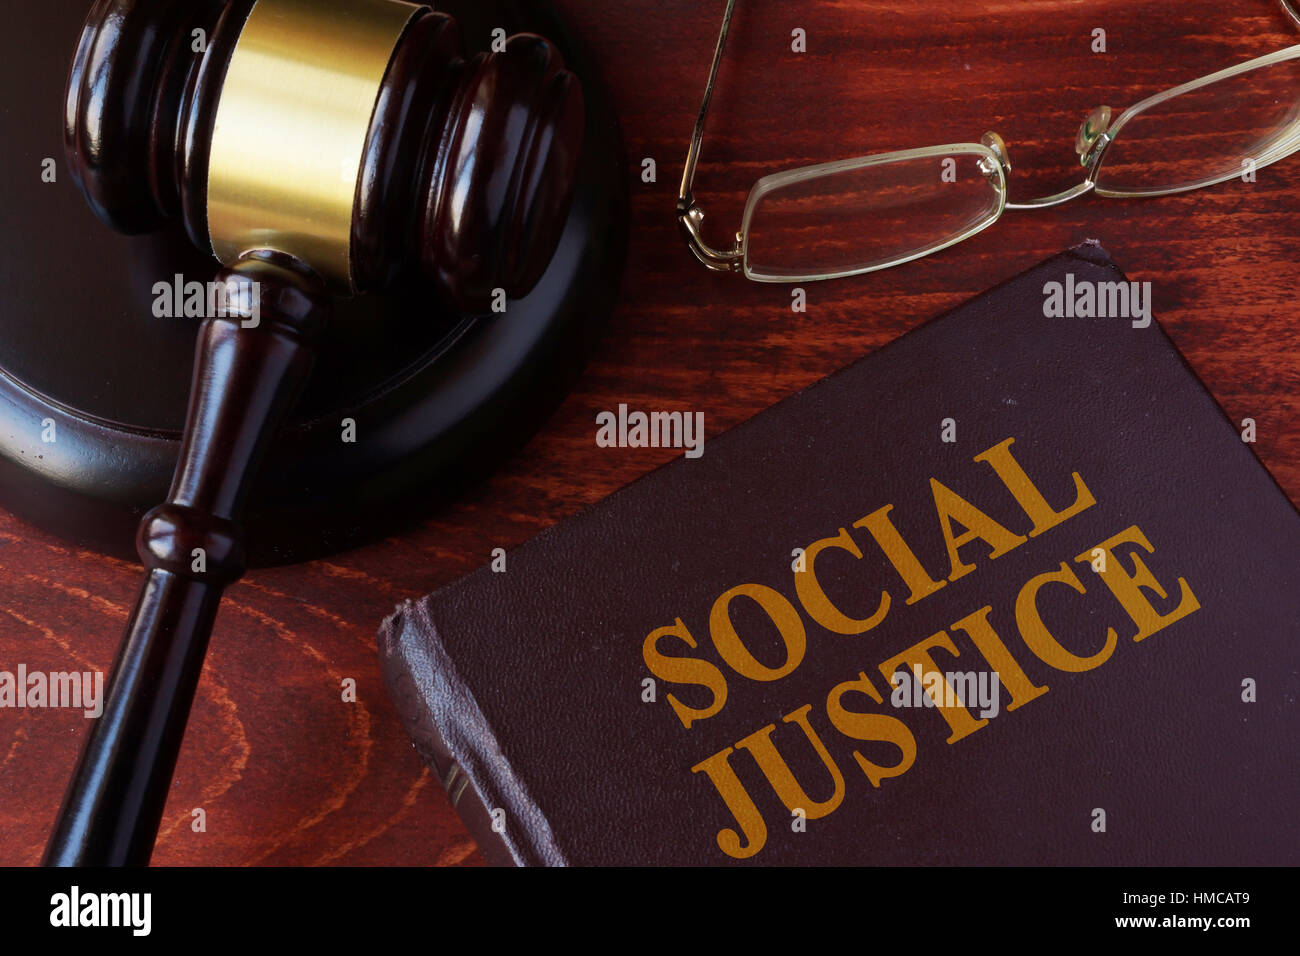 Book with title social justice on a table. Stock Photo